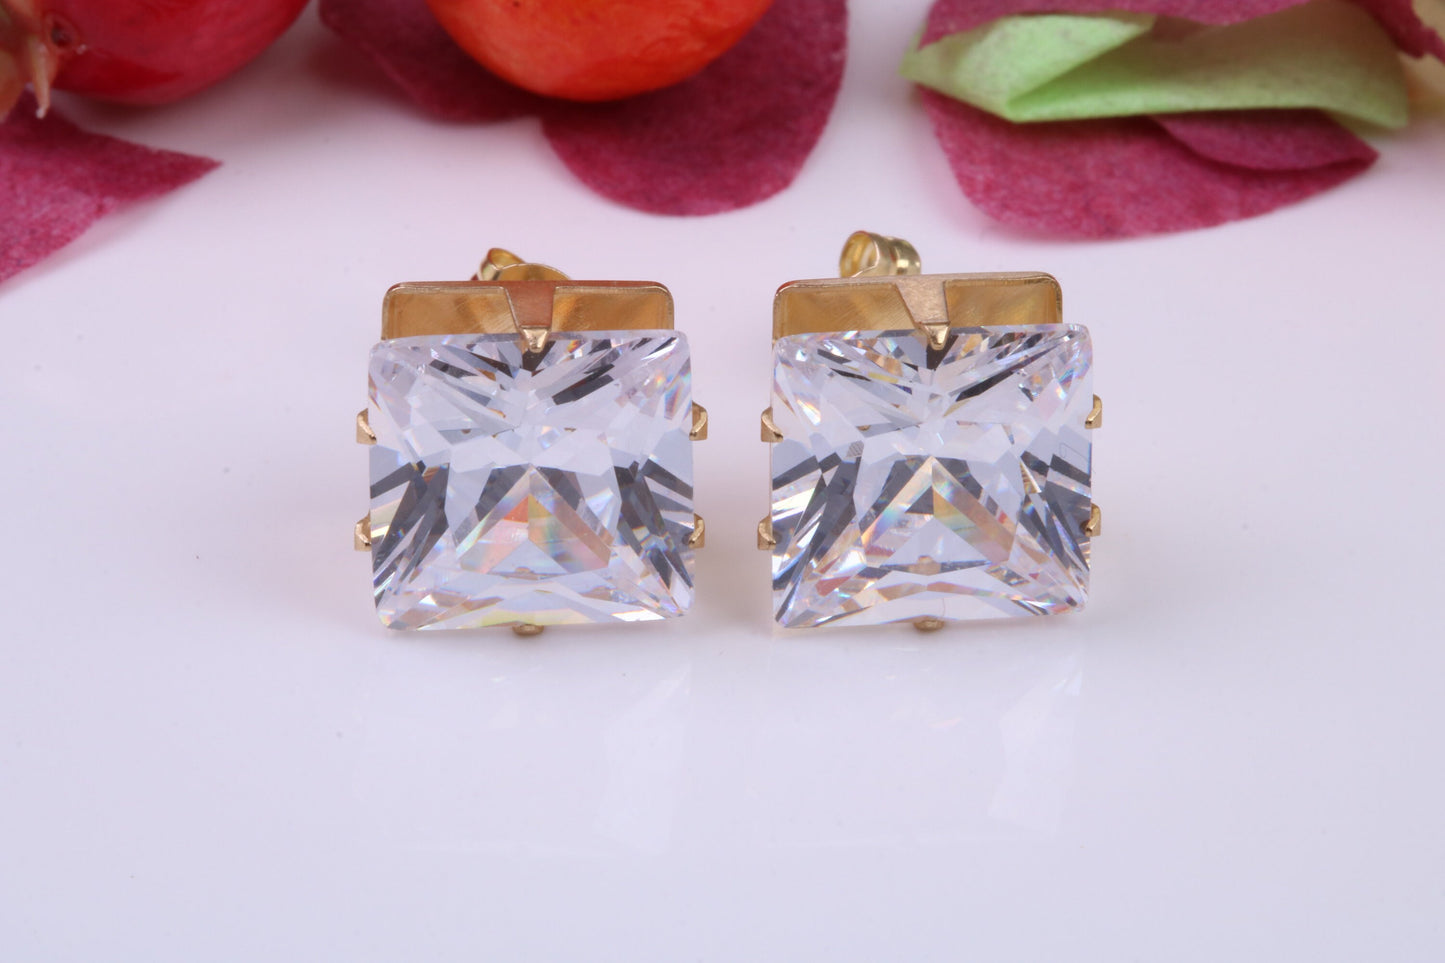 10 mm Square Basket set Cubic Zirconia Stud Earrings, Made from Solid 9ct Yellow Gold, 8 Claw Setting